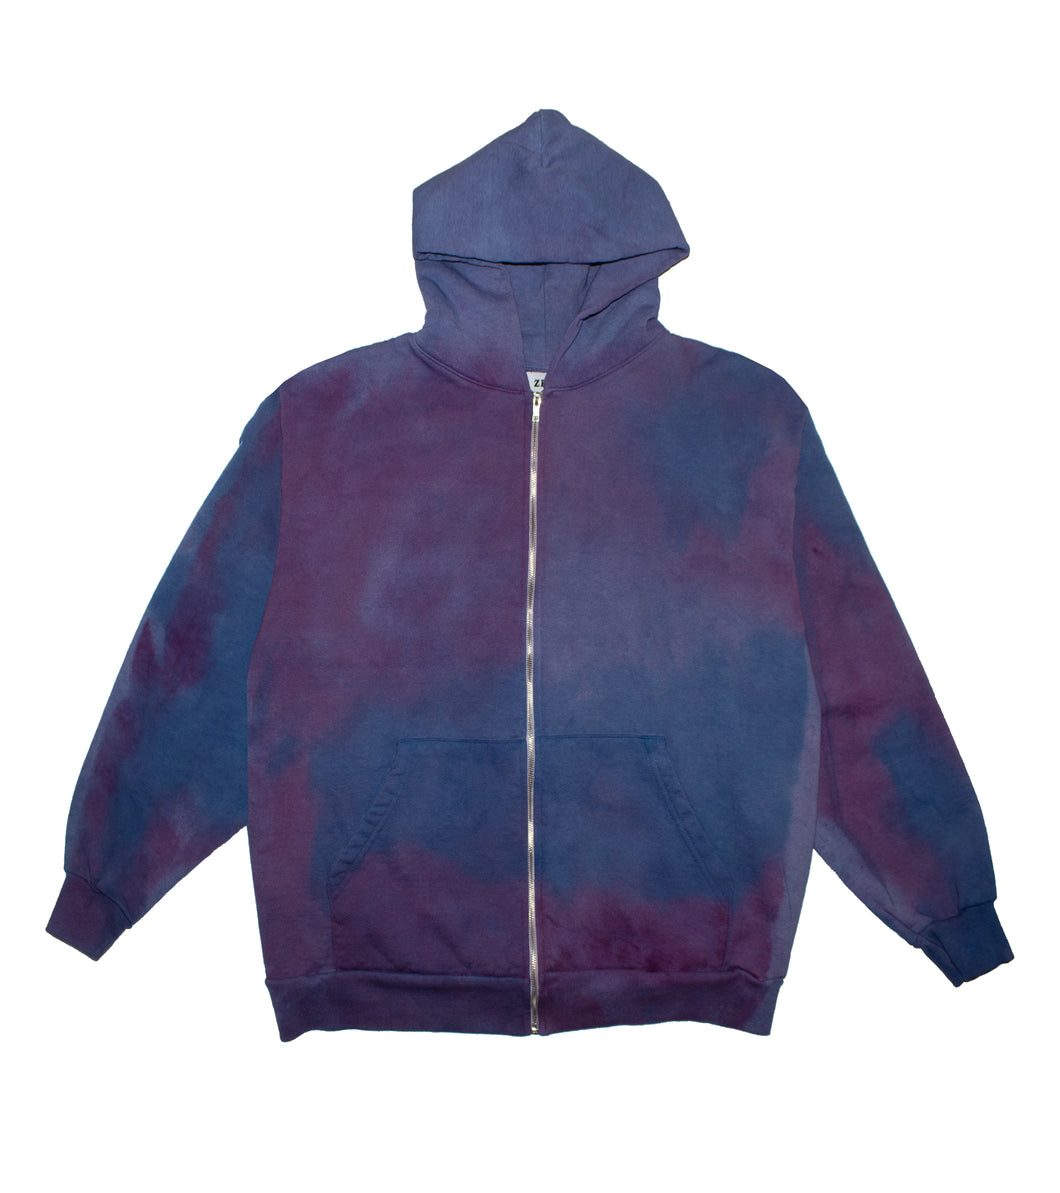 Hand Dyed Multi Color Zip-Up Hoodie - XL